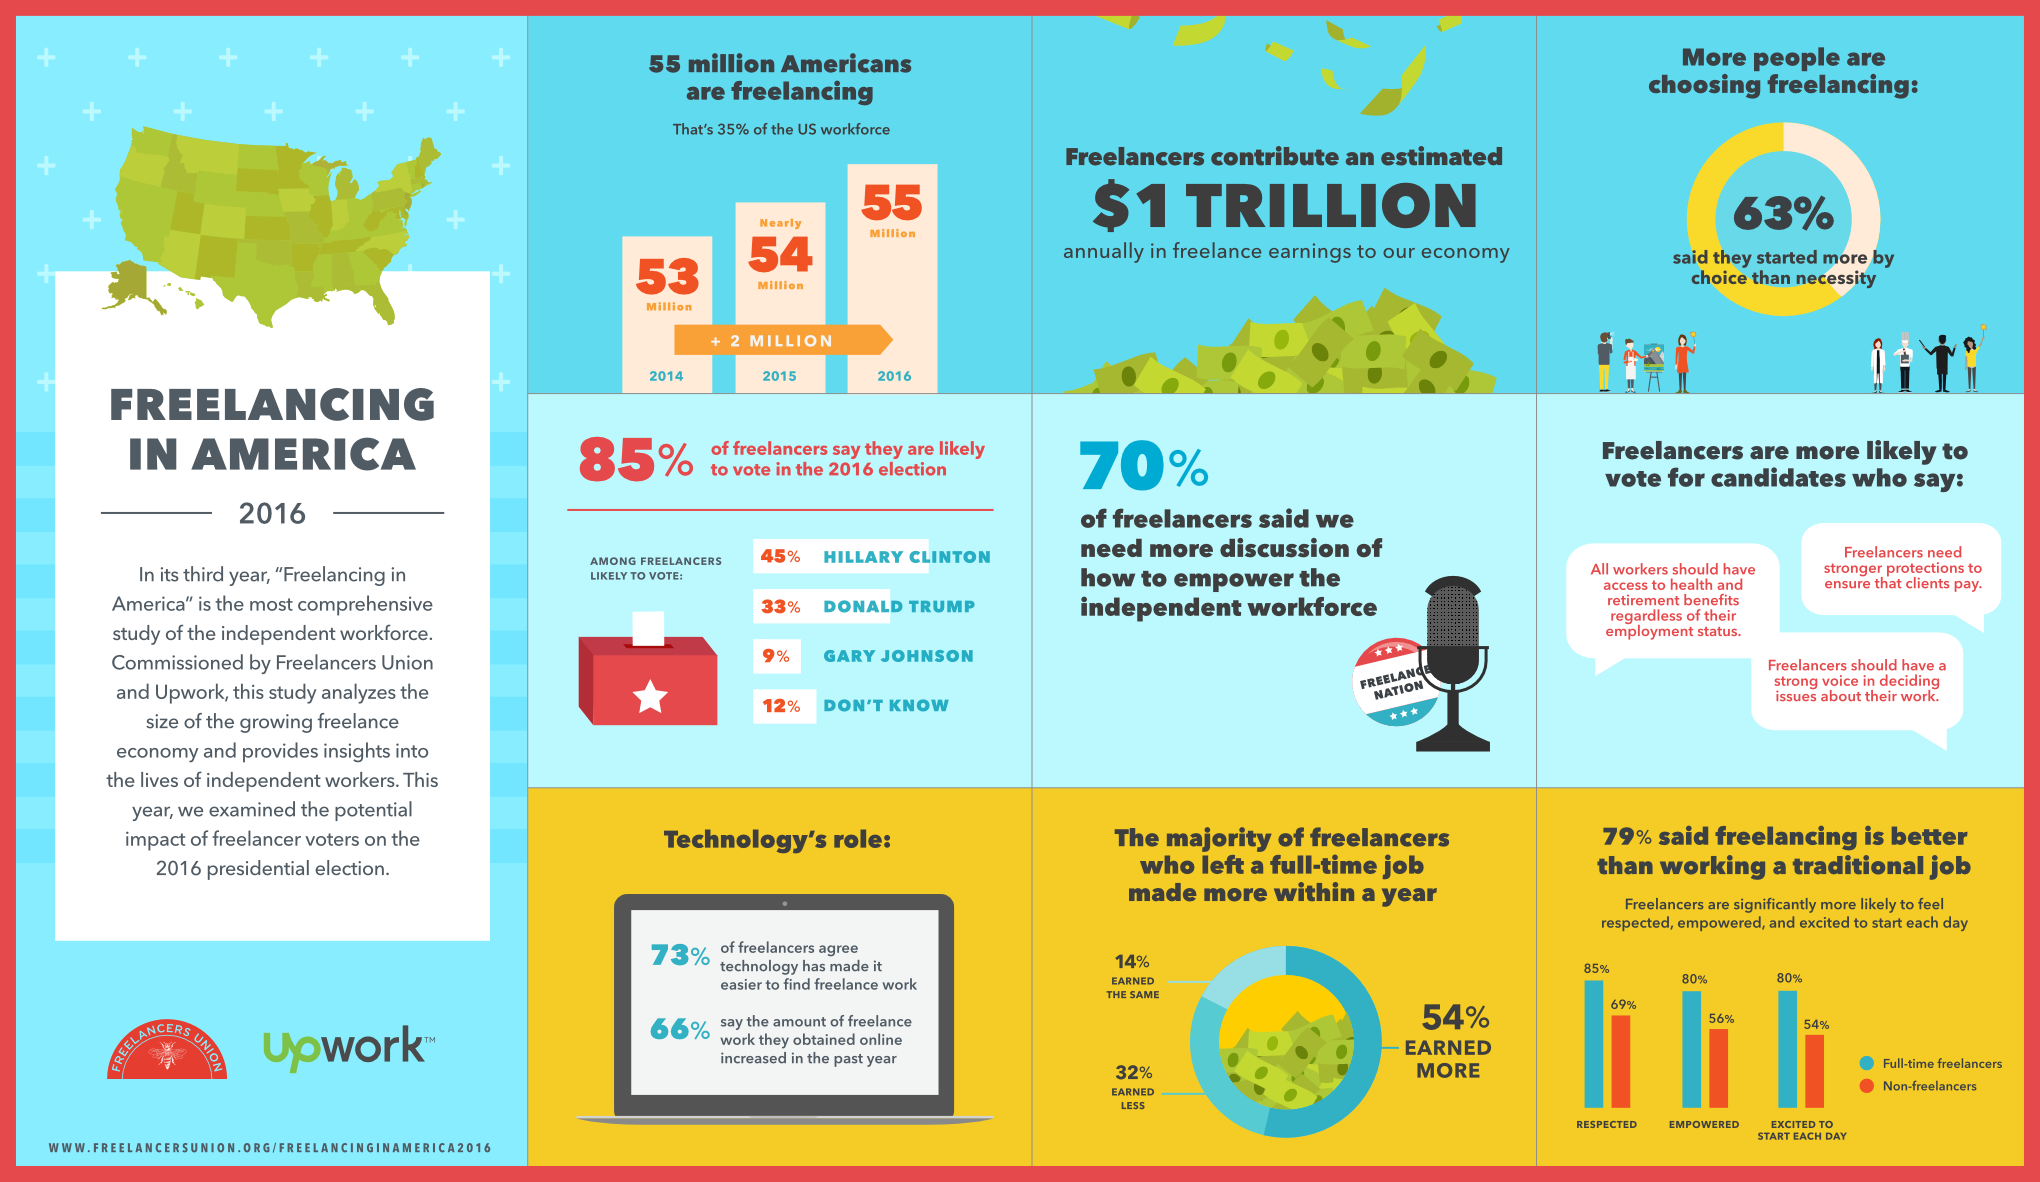 freelancing-in-america-usa-infographic-2016-freelance-chiffres-cles-statistiques-amerique